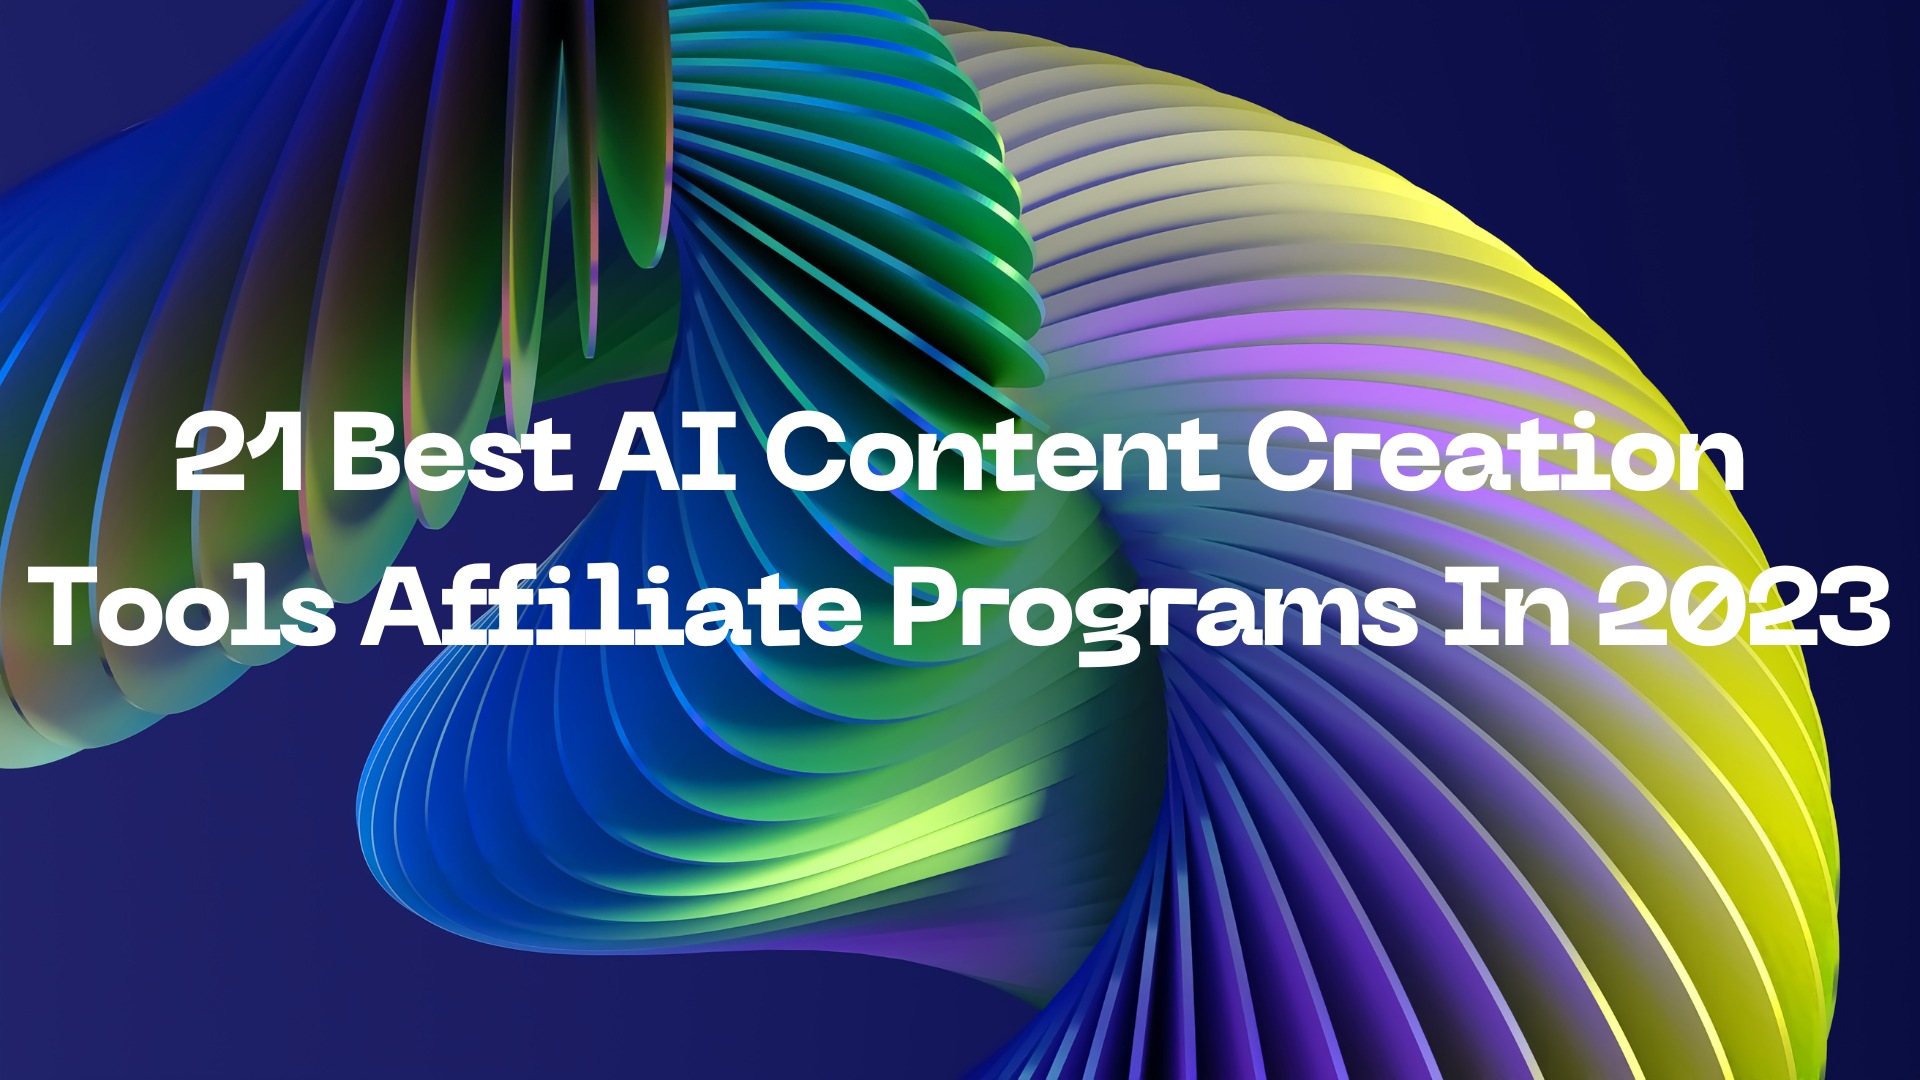 21 Best AI Content Creation Tools Affiliate Programs In 2023